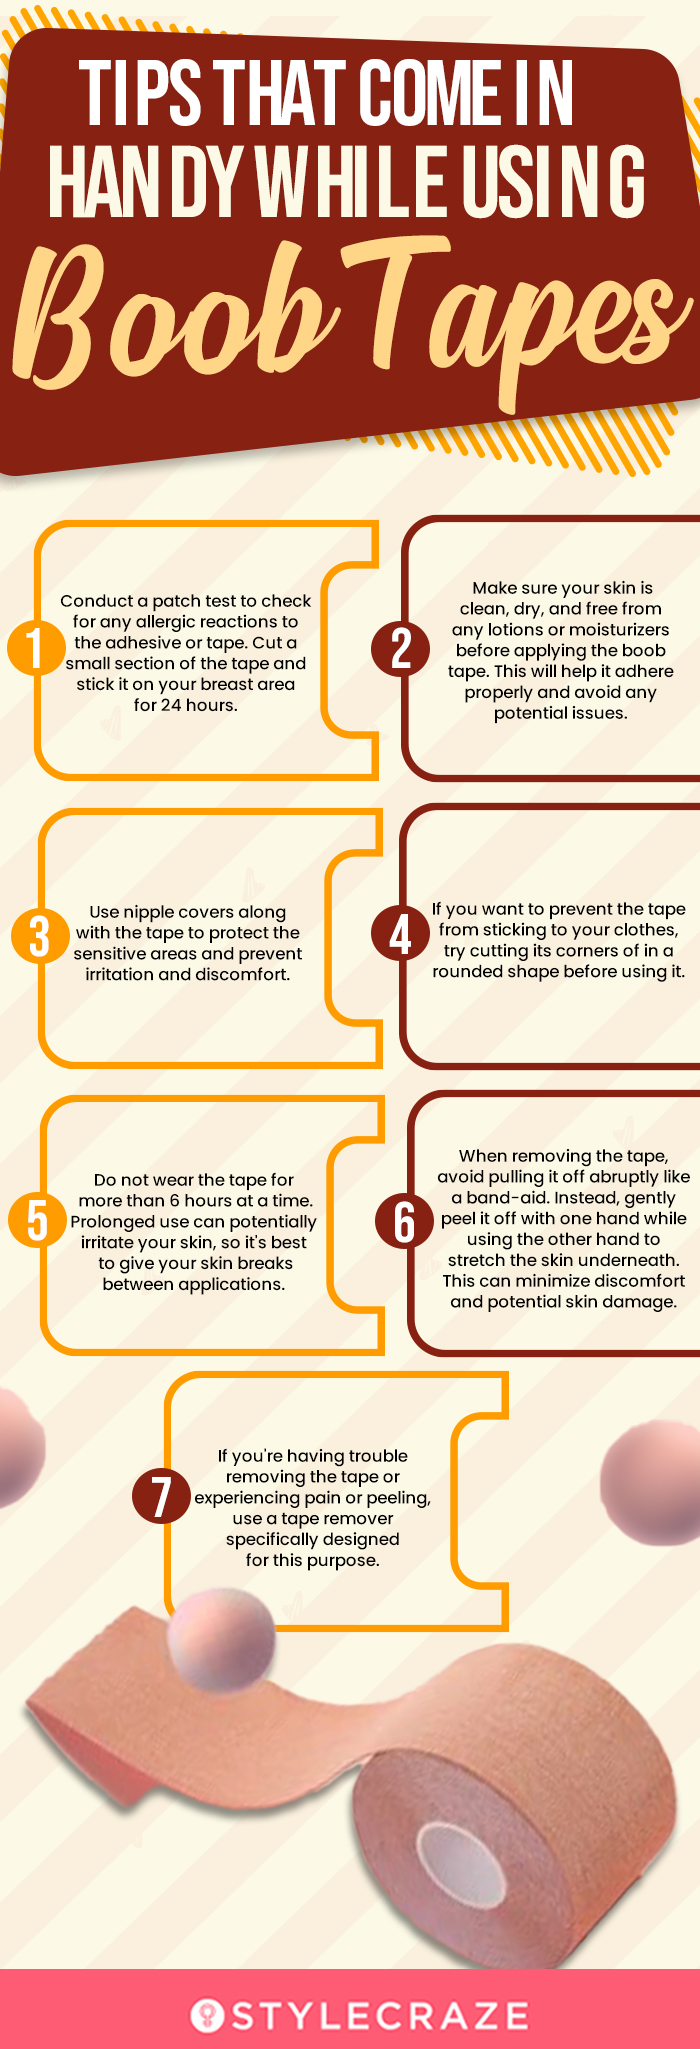 Tips That Come In Handy While Using Boob Tapes (infographic)